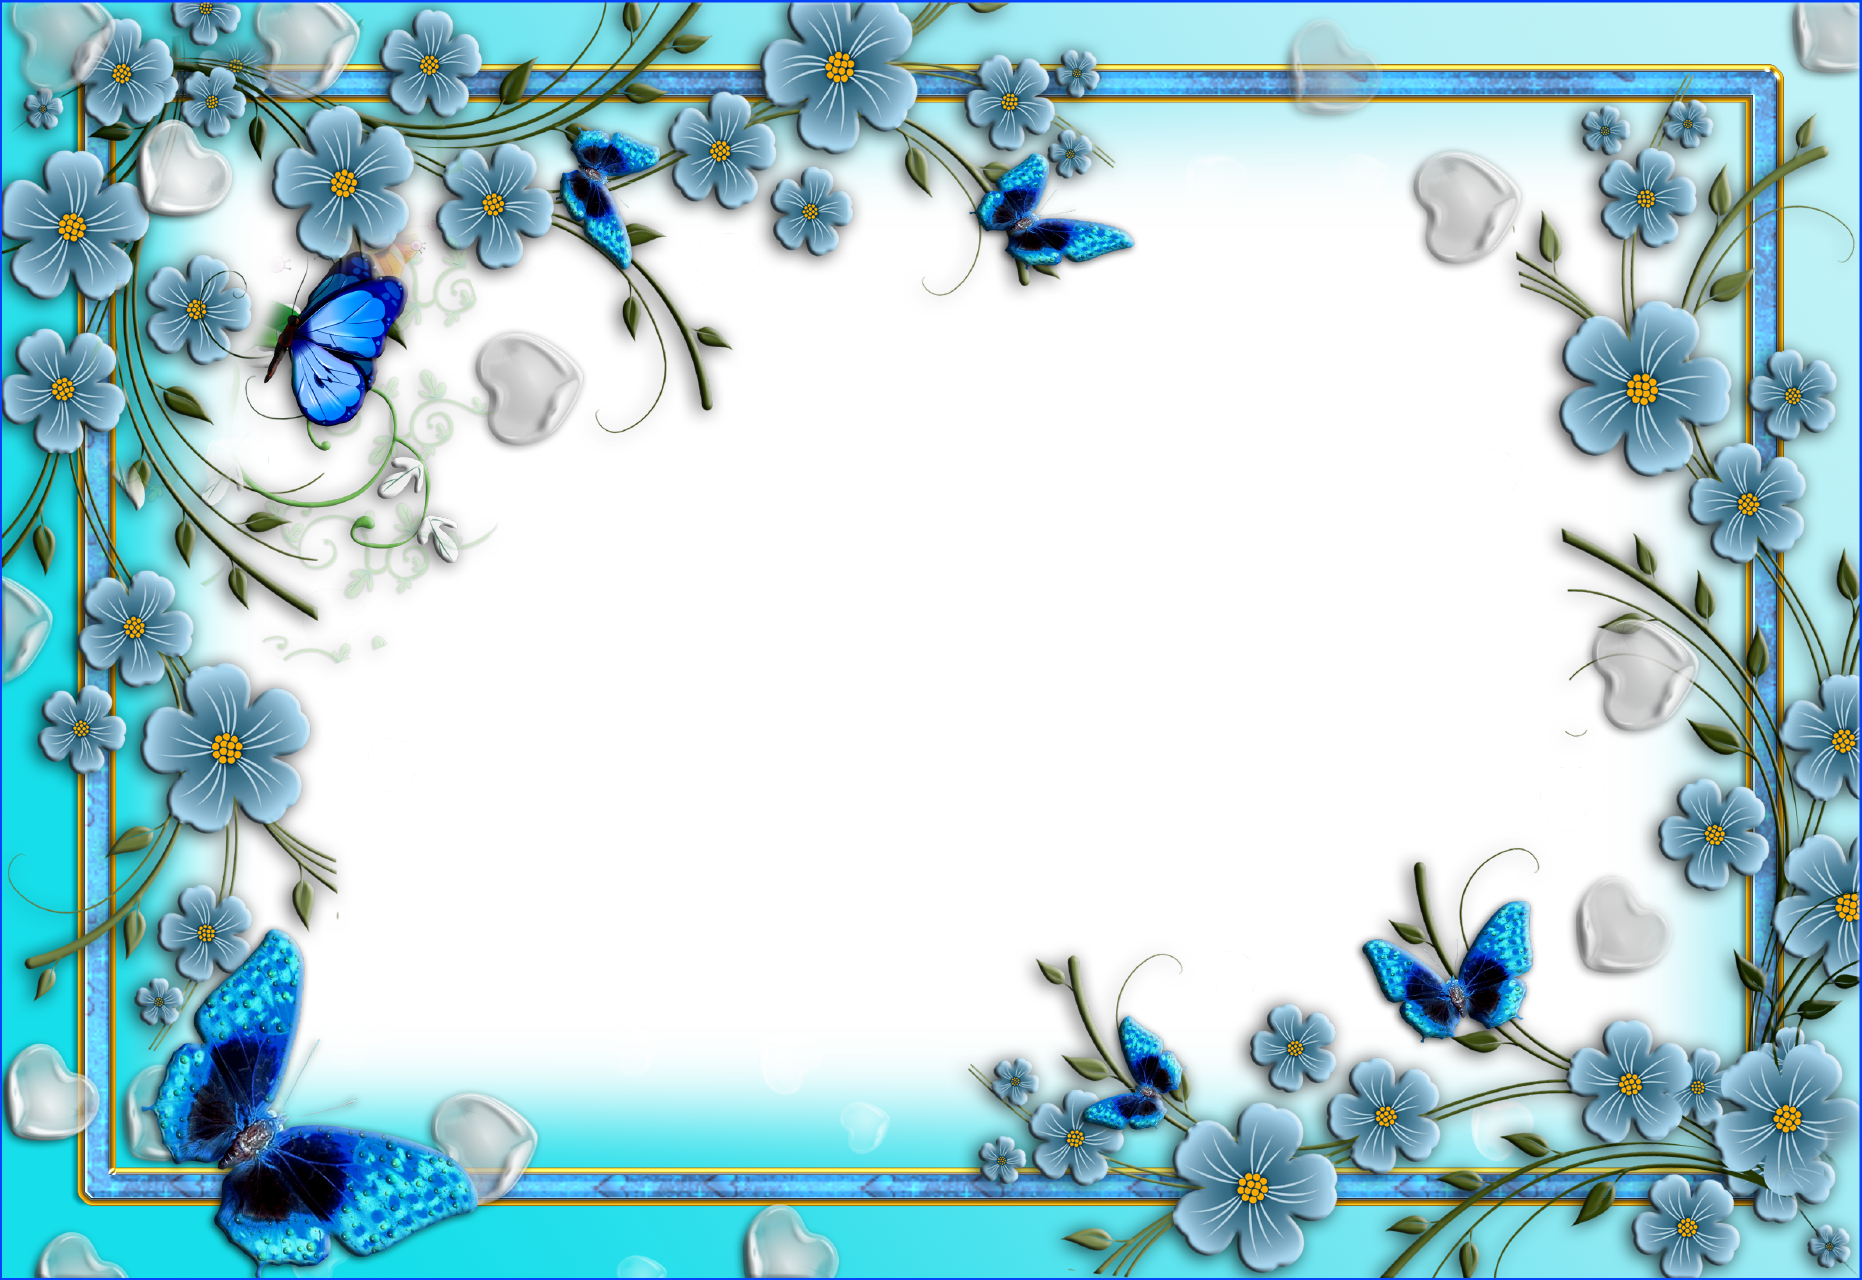 Turquoise Floral Border PNG Image Background